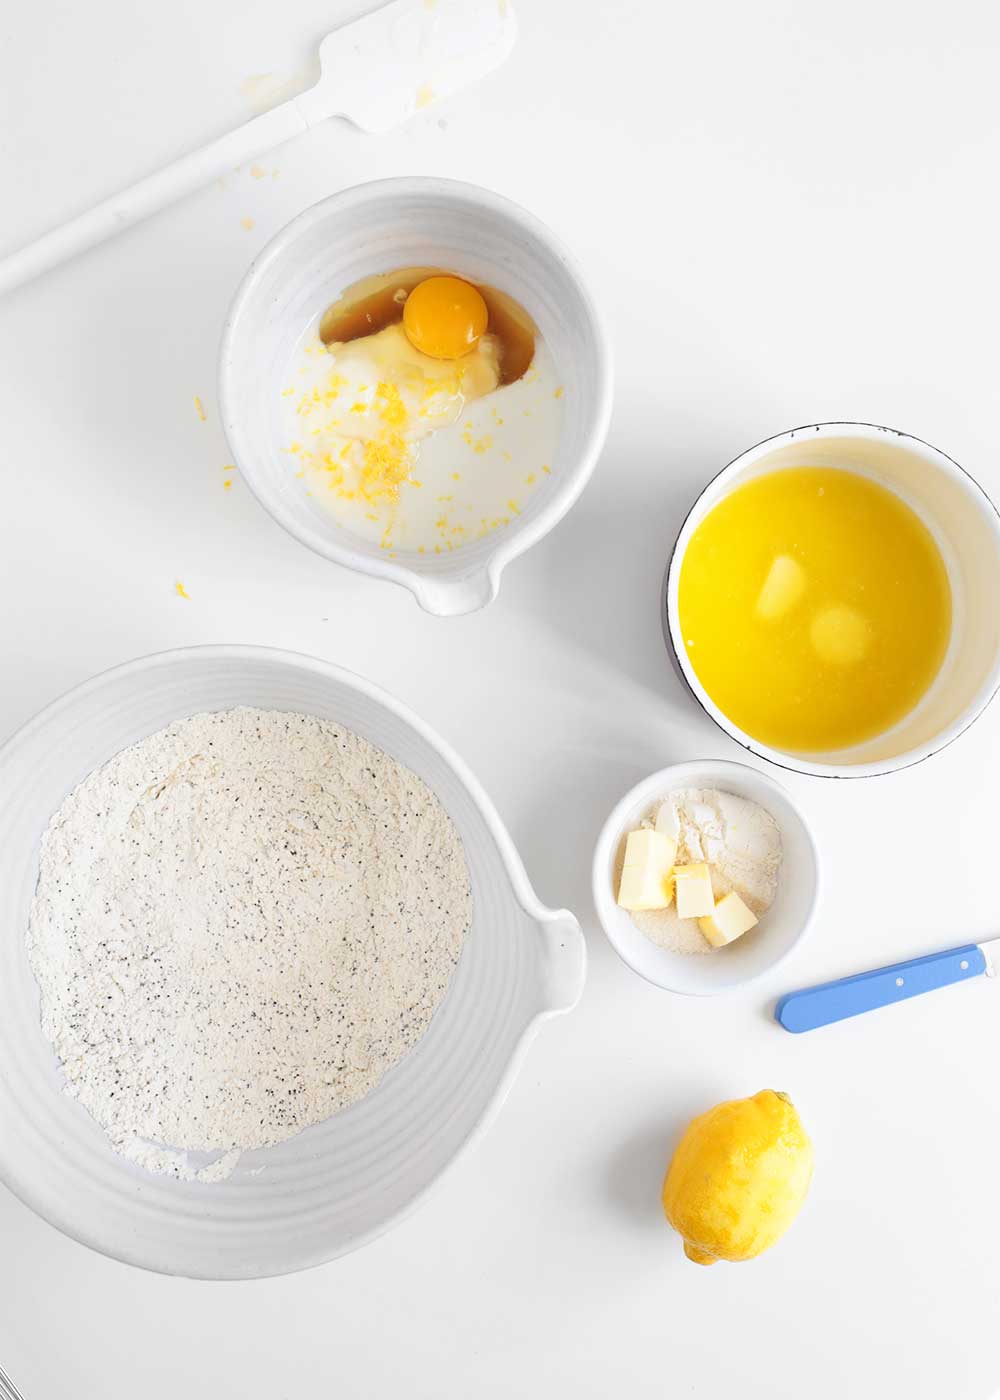 wet and dry ingredients for lemon poppy seed muffins from the faux martha